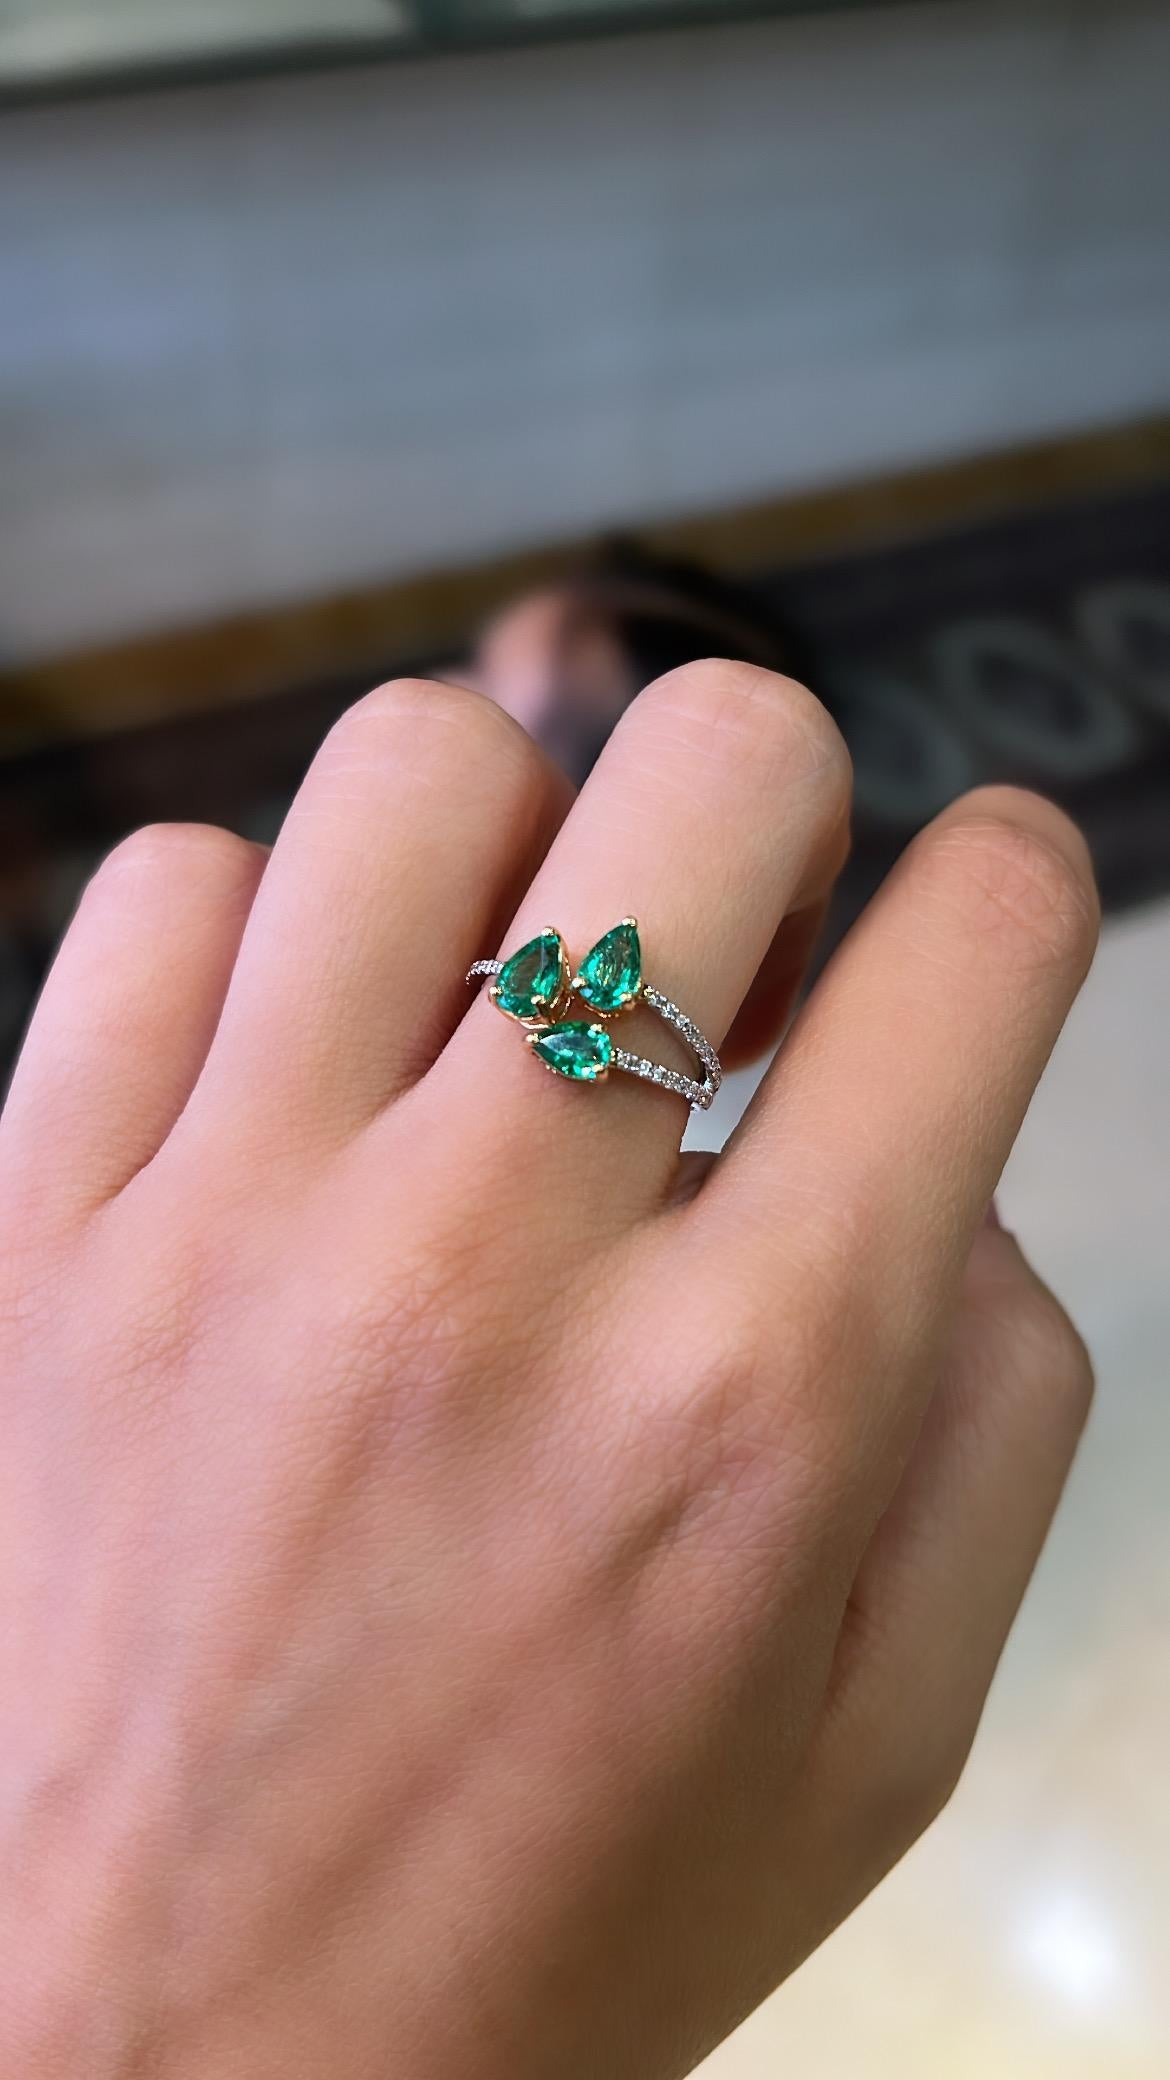 A very dainty and beautiful, Emerald Cocktail/ Three - Stone Ring set in 18K Gold & Diamonds. The weight of the Emeralds is 1.04 carats. The Emeralds are completely natural, without any treatment and is of Zambian origin. The weight of the Diamonds